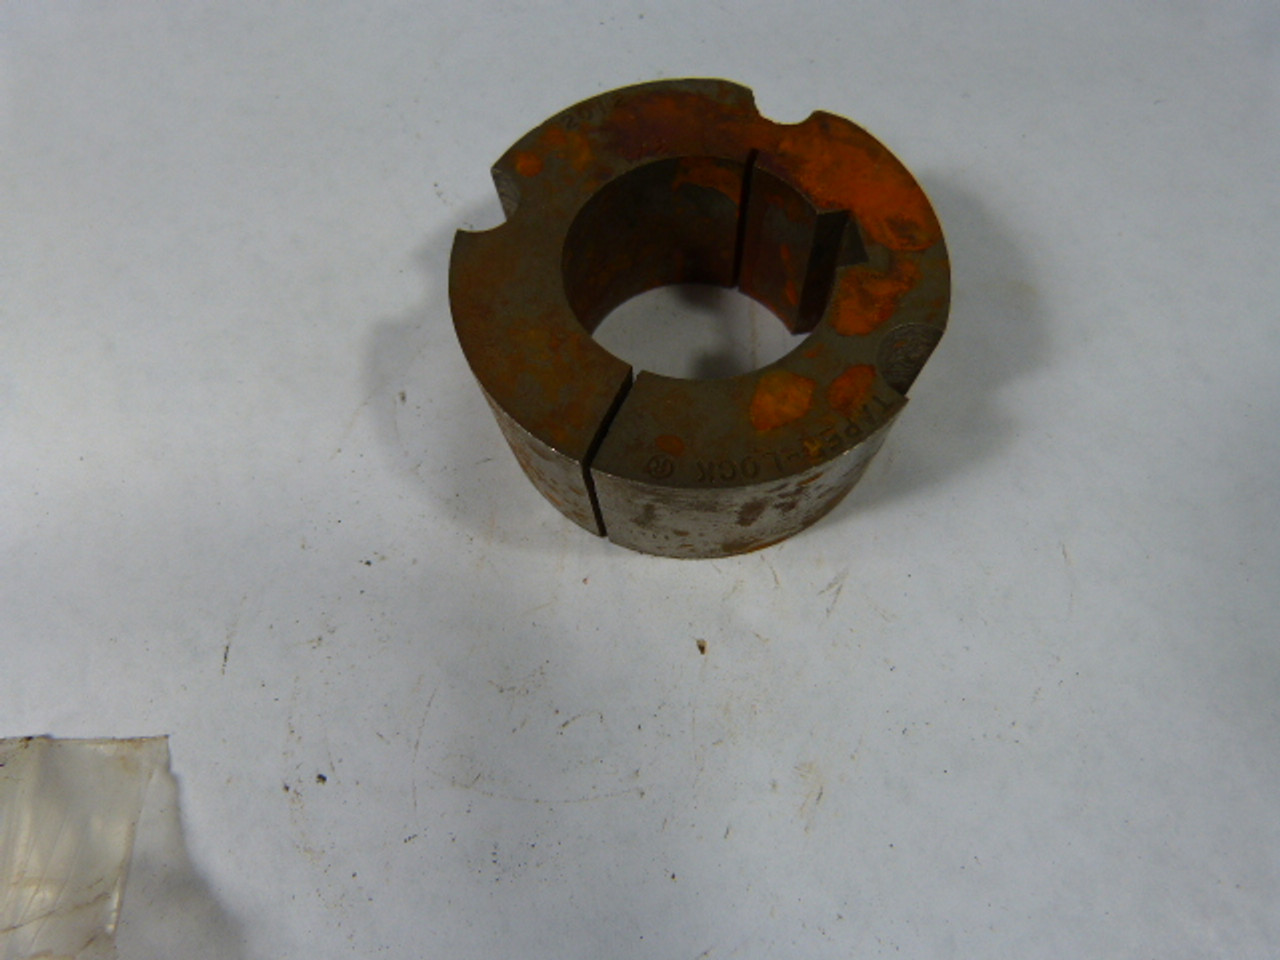 Dodge 2012-1-1/2 Tapered Bushing 2-3/4" OD 1-1/2" Bore 1-1/4" LTB USED